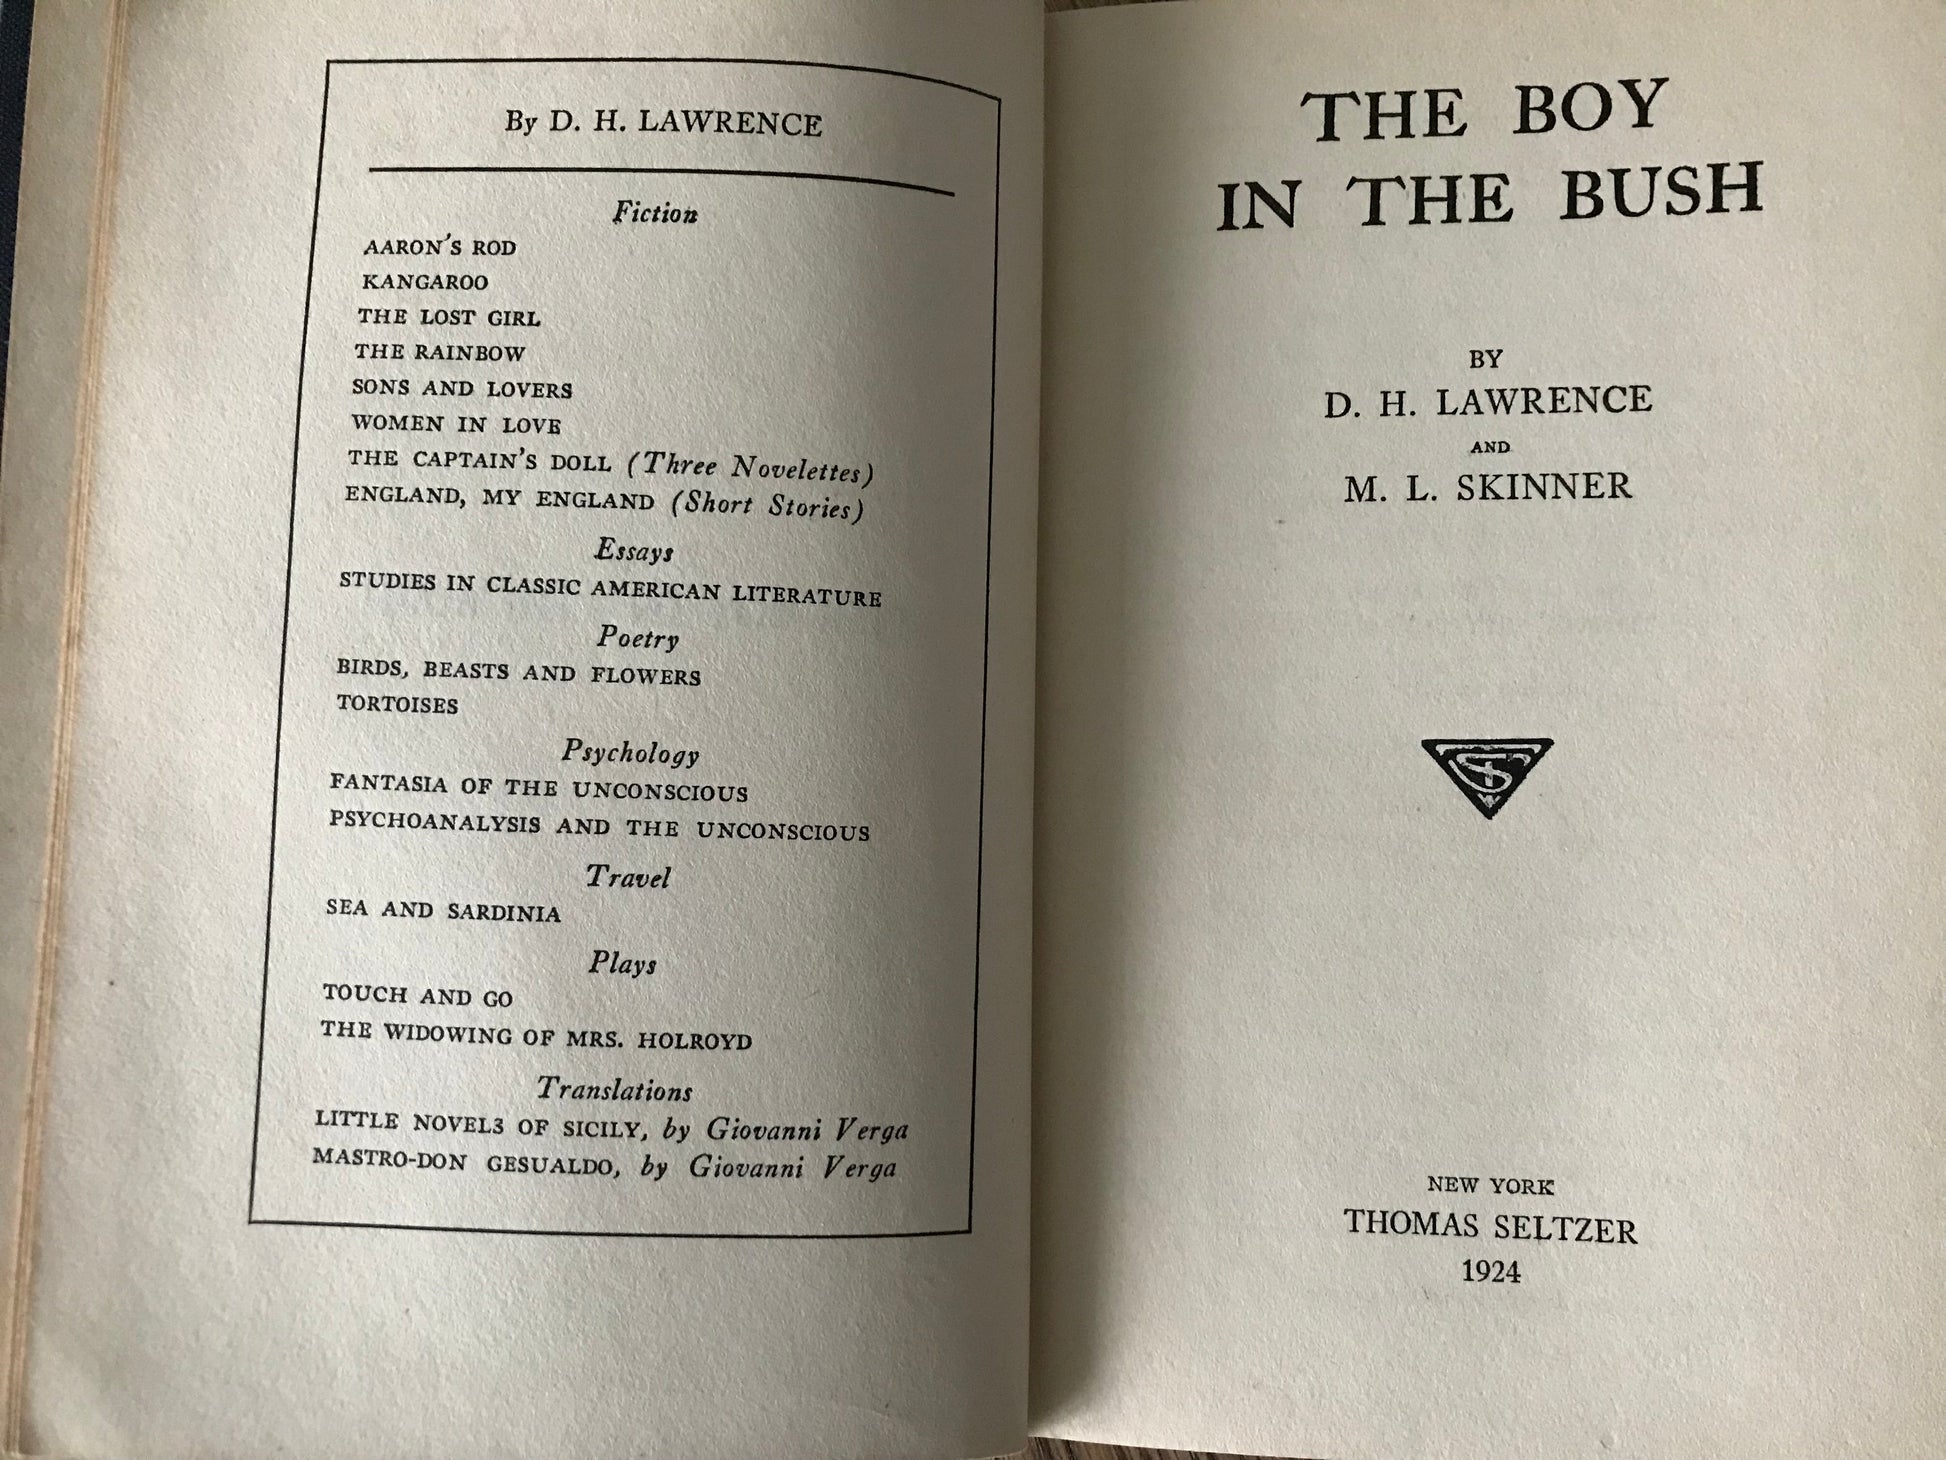 THE BOY IN THE BUSH -  D.H. LAWRENCE  AND M.L. SKINNER BooksCardsNBikes